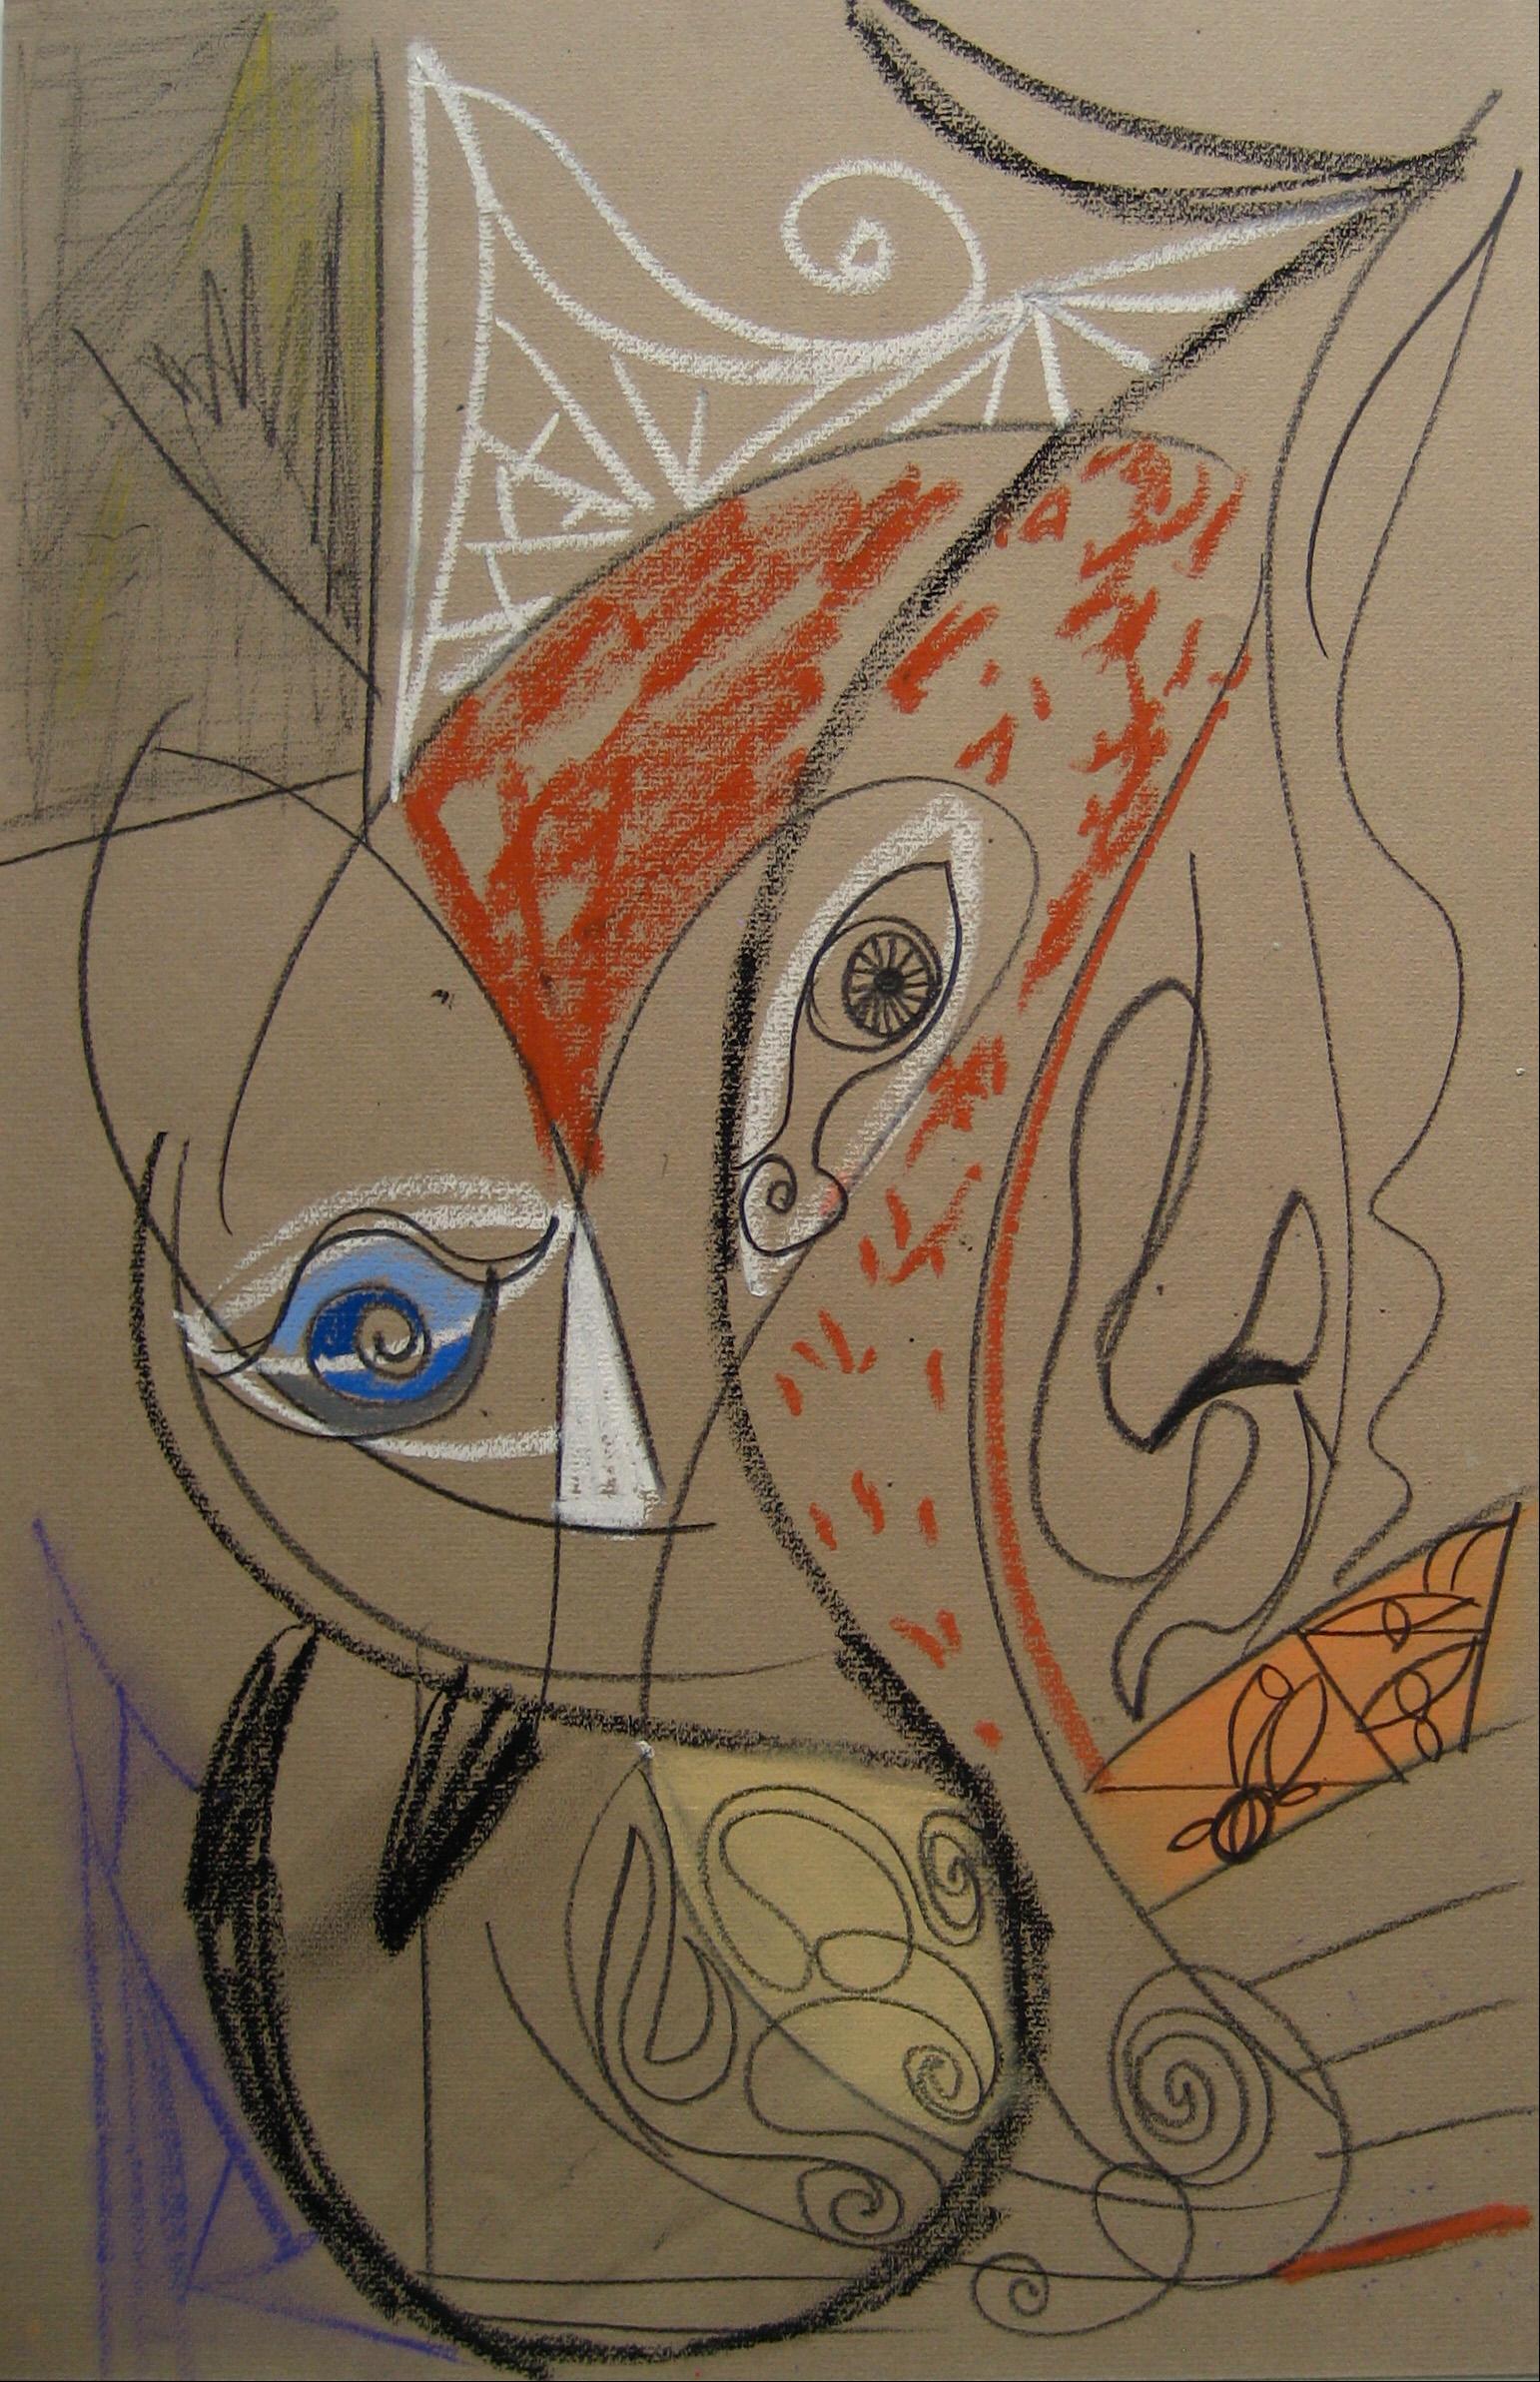 This late 20th century pastel and graphite on paper abstract drawing on brown paper is by Abstract Surrealist San Francisco artist Michael di Cosola (1929-2010). Di Cosola studied at the Chicago Art Institute before moving to the Bay Area to study